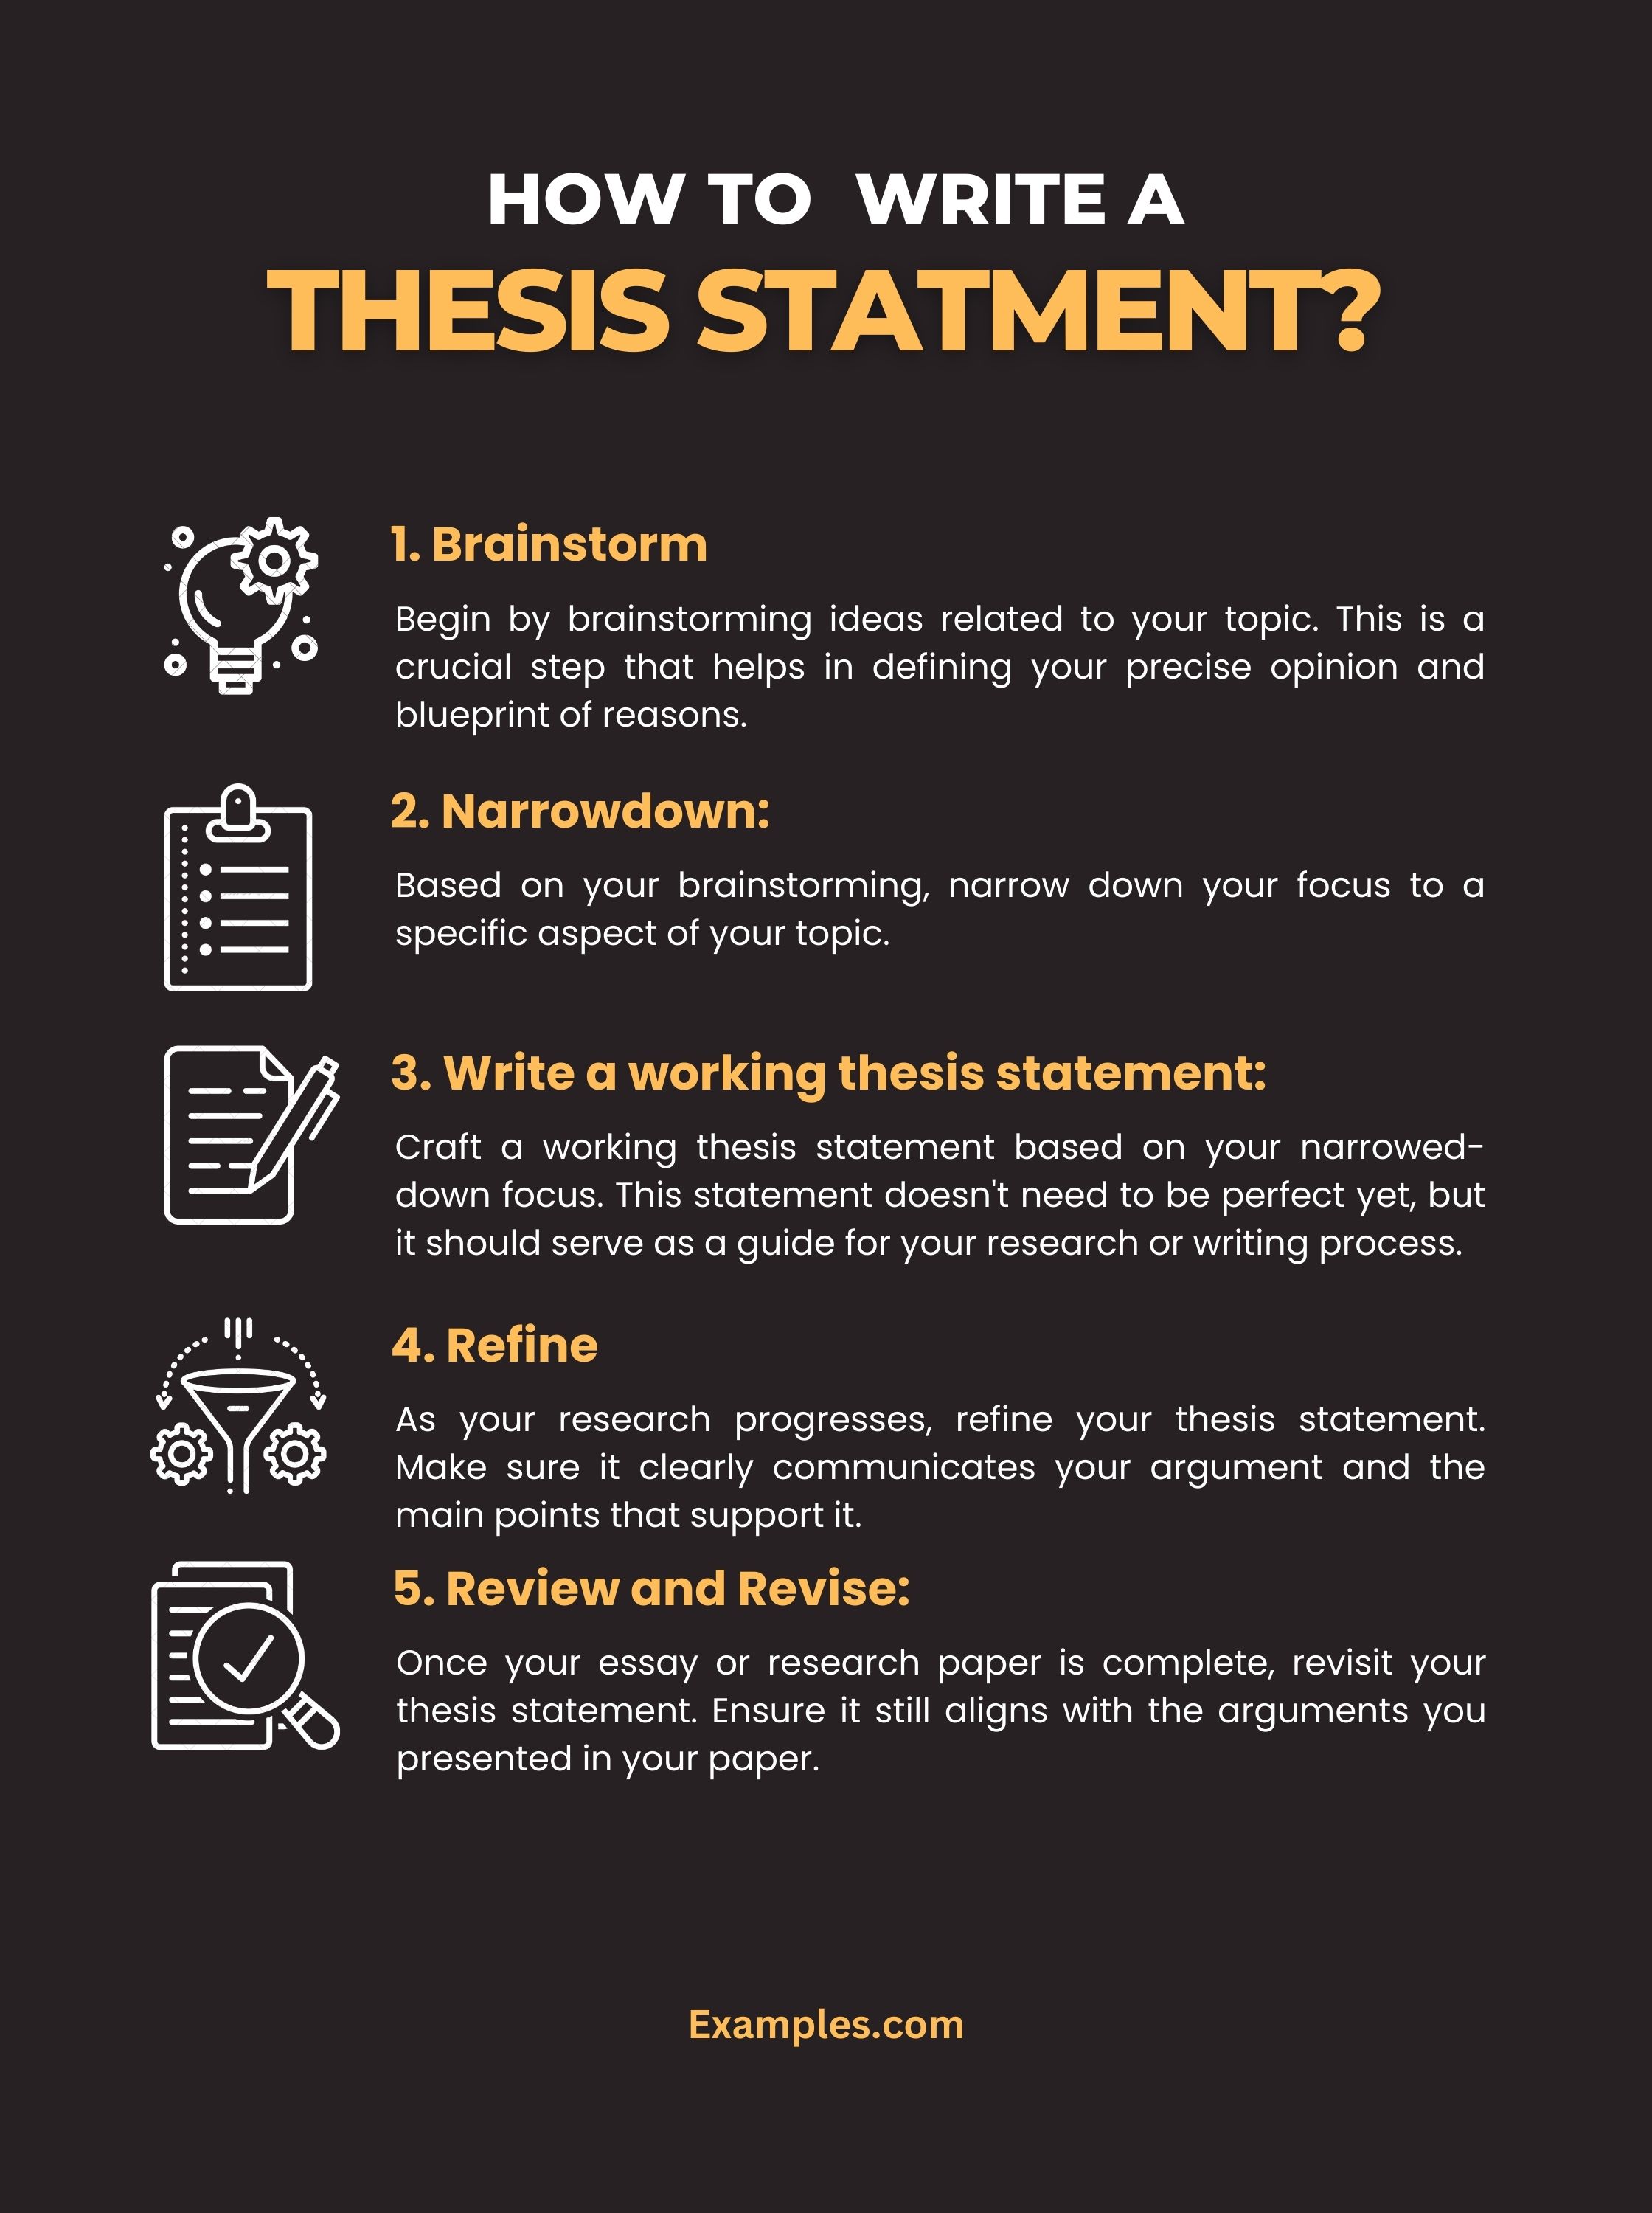 a working thesis is a statement that